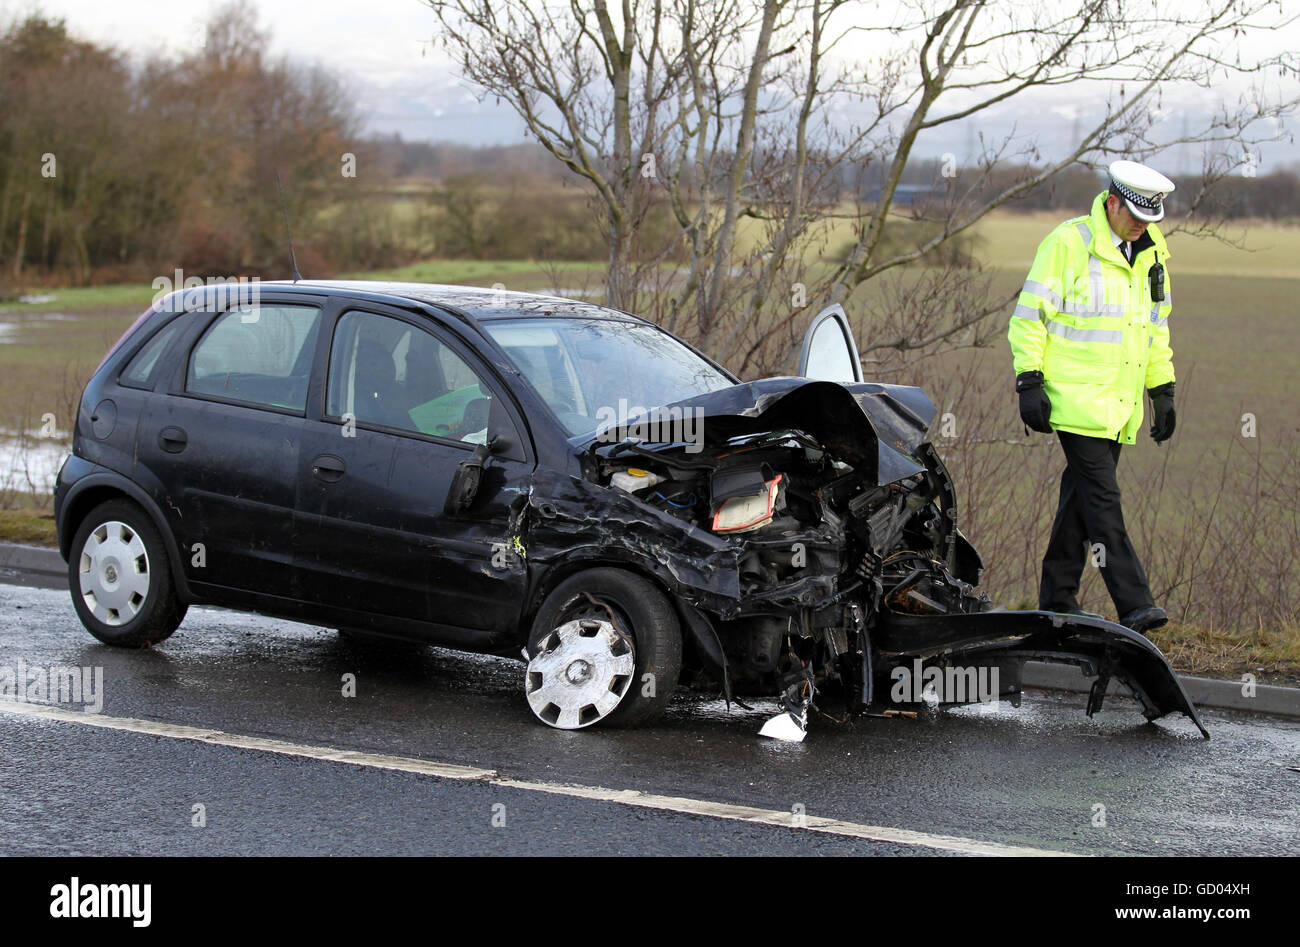 A Police Officer Views A Car After Four Vehicles Crashed On The M9 GD04XH 